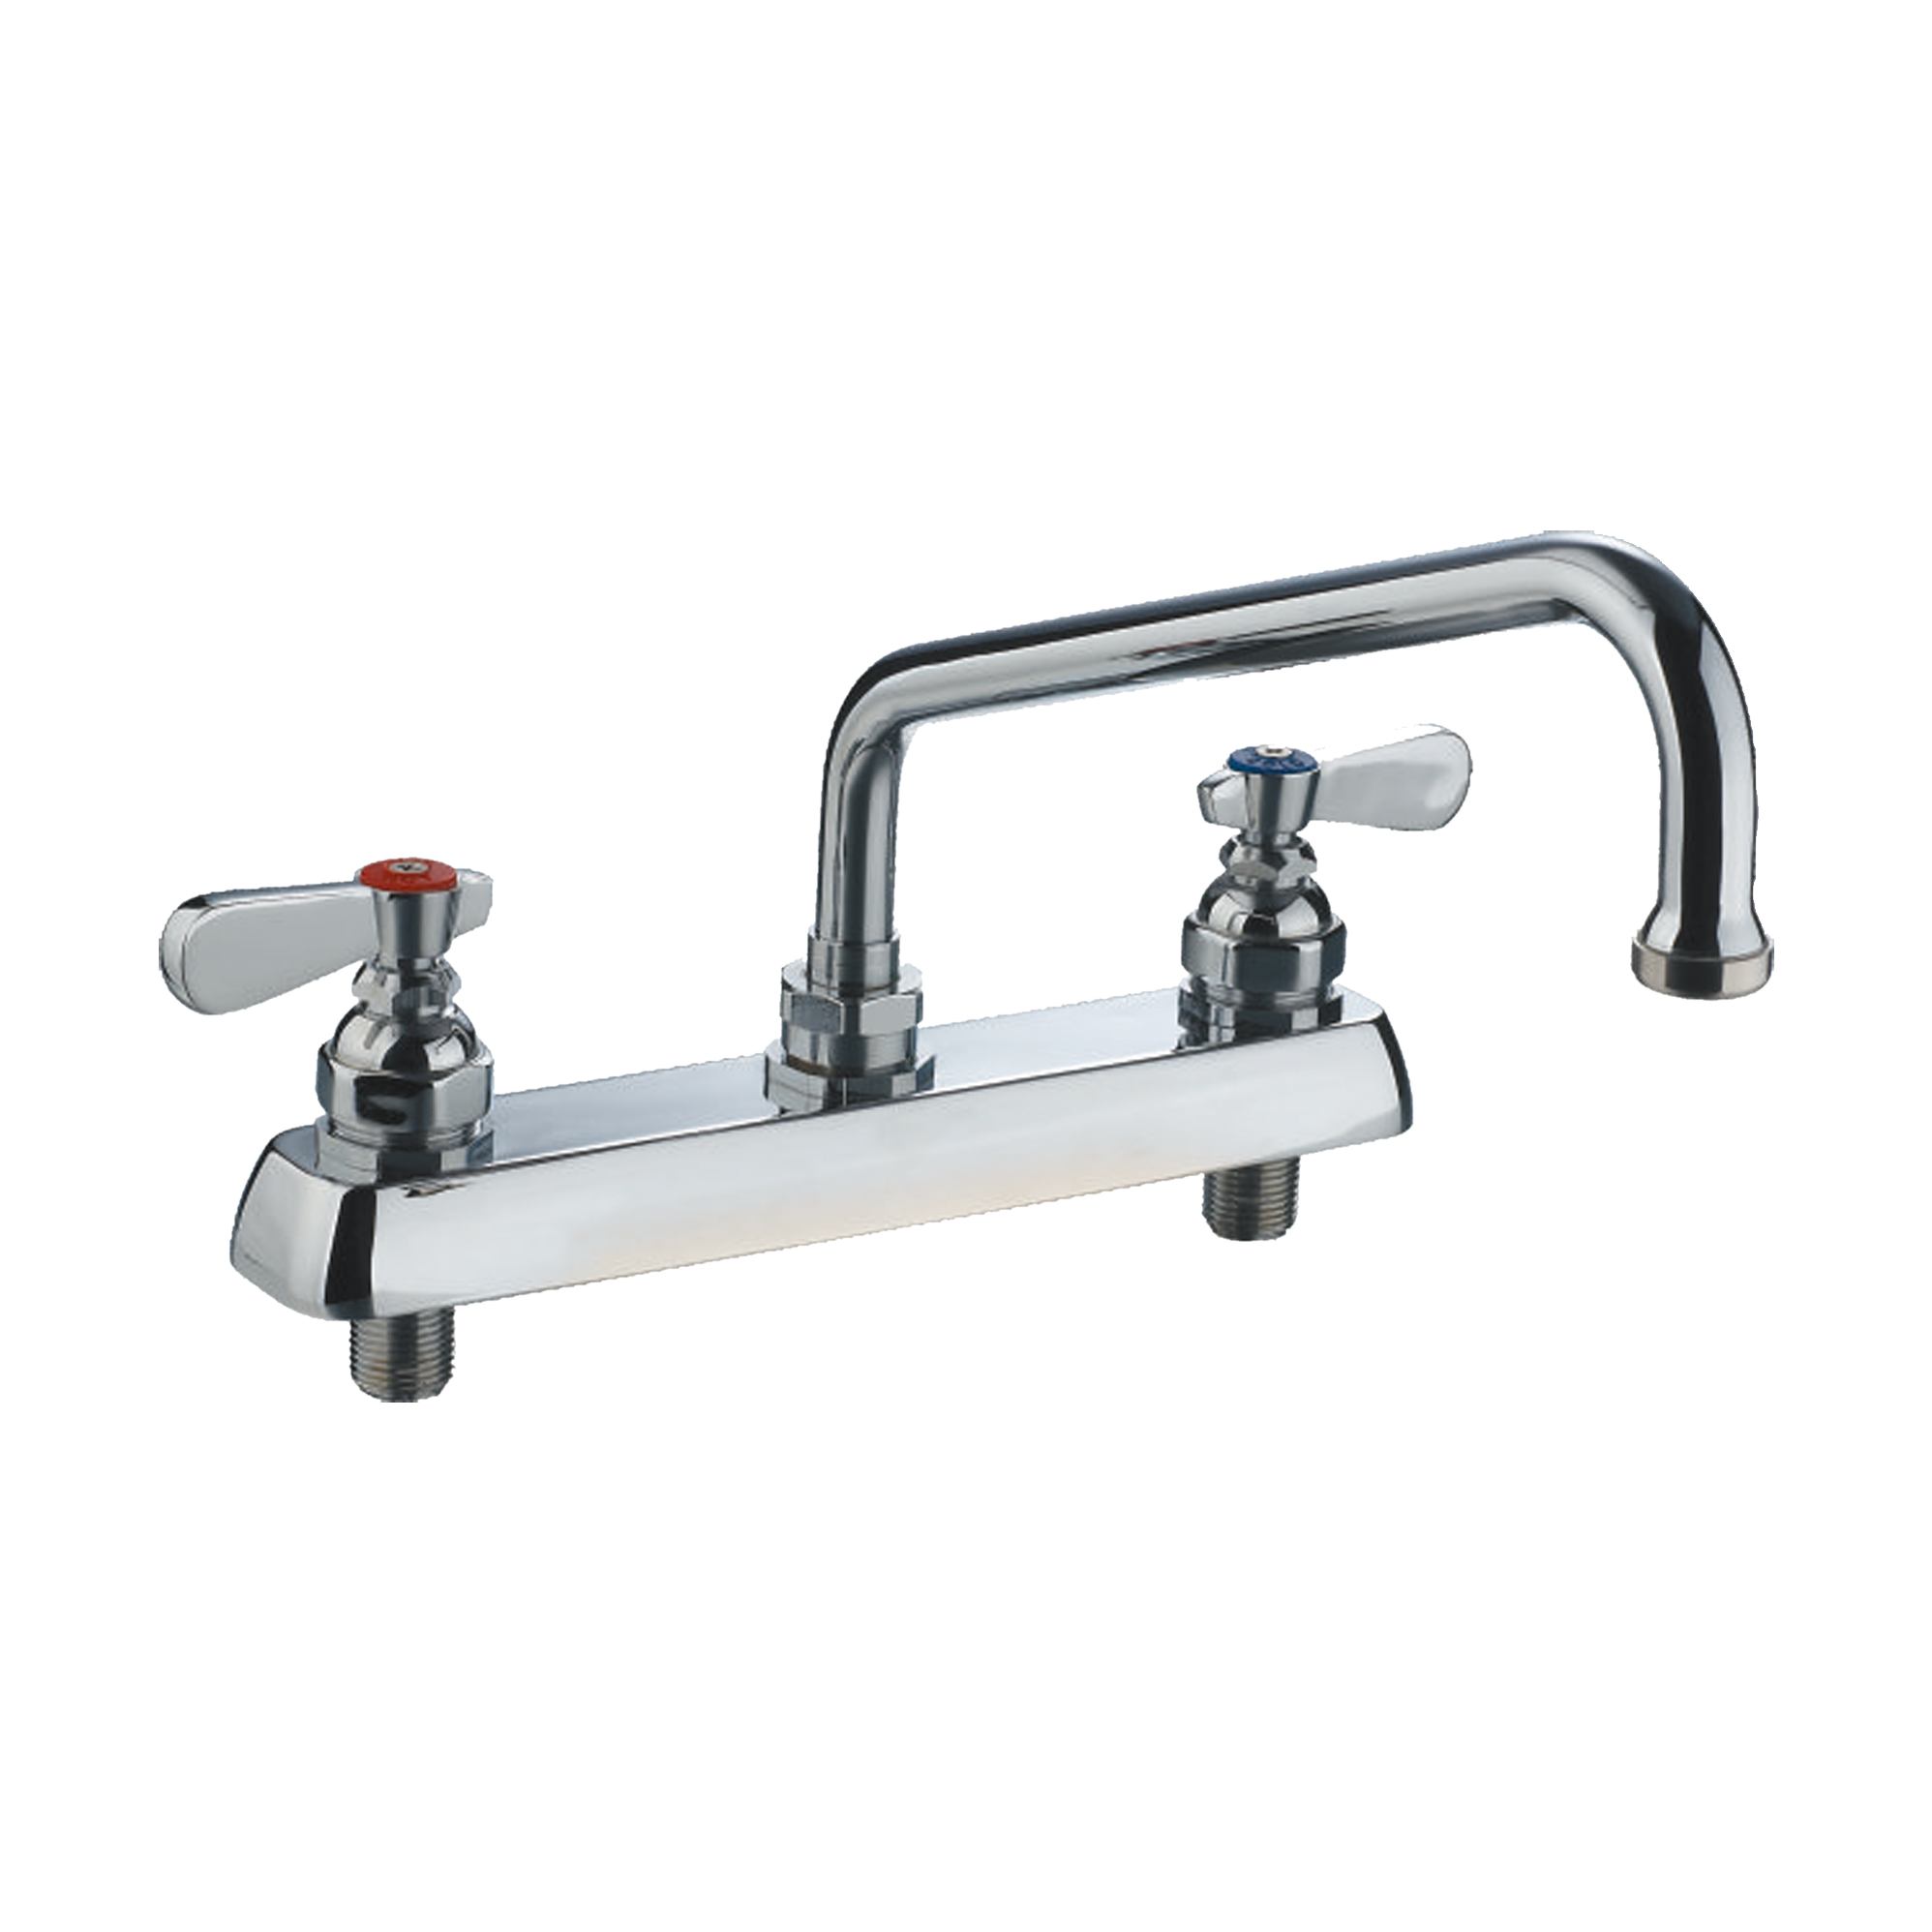 Top-Rinse 9810-12 Double Workboard Faucet